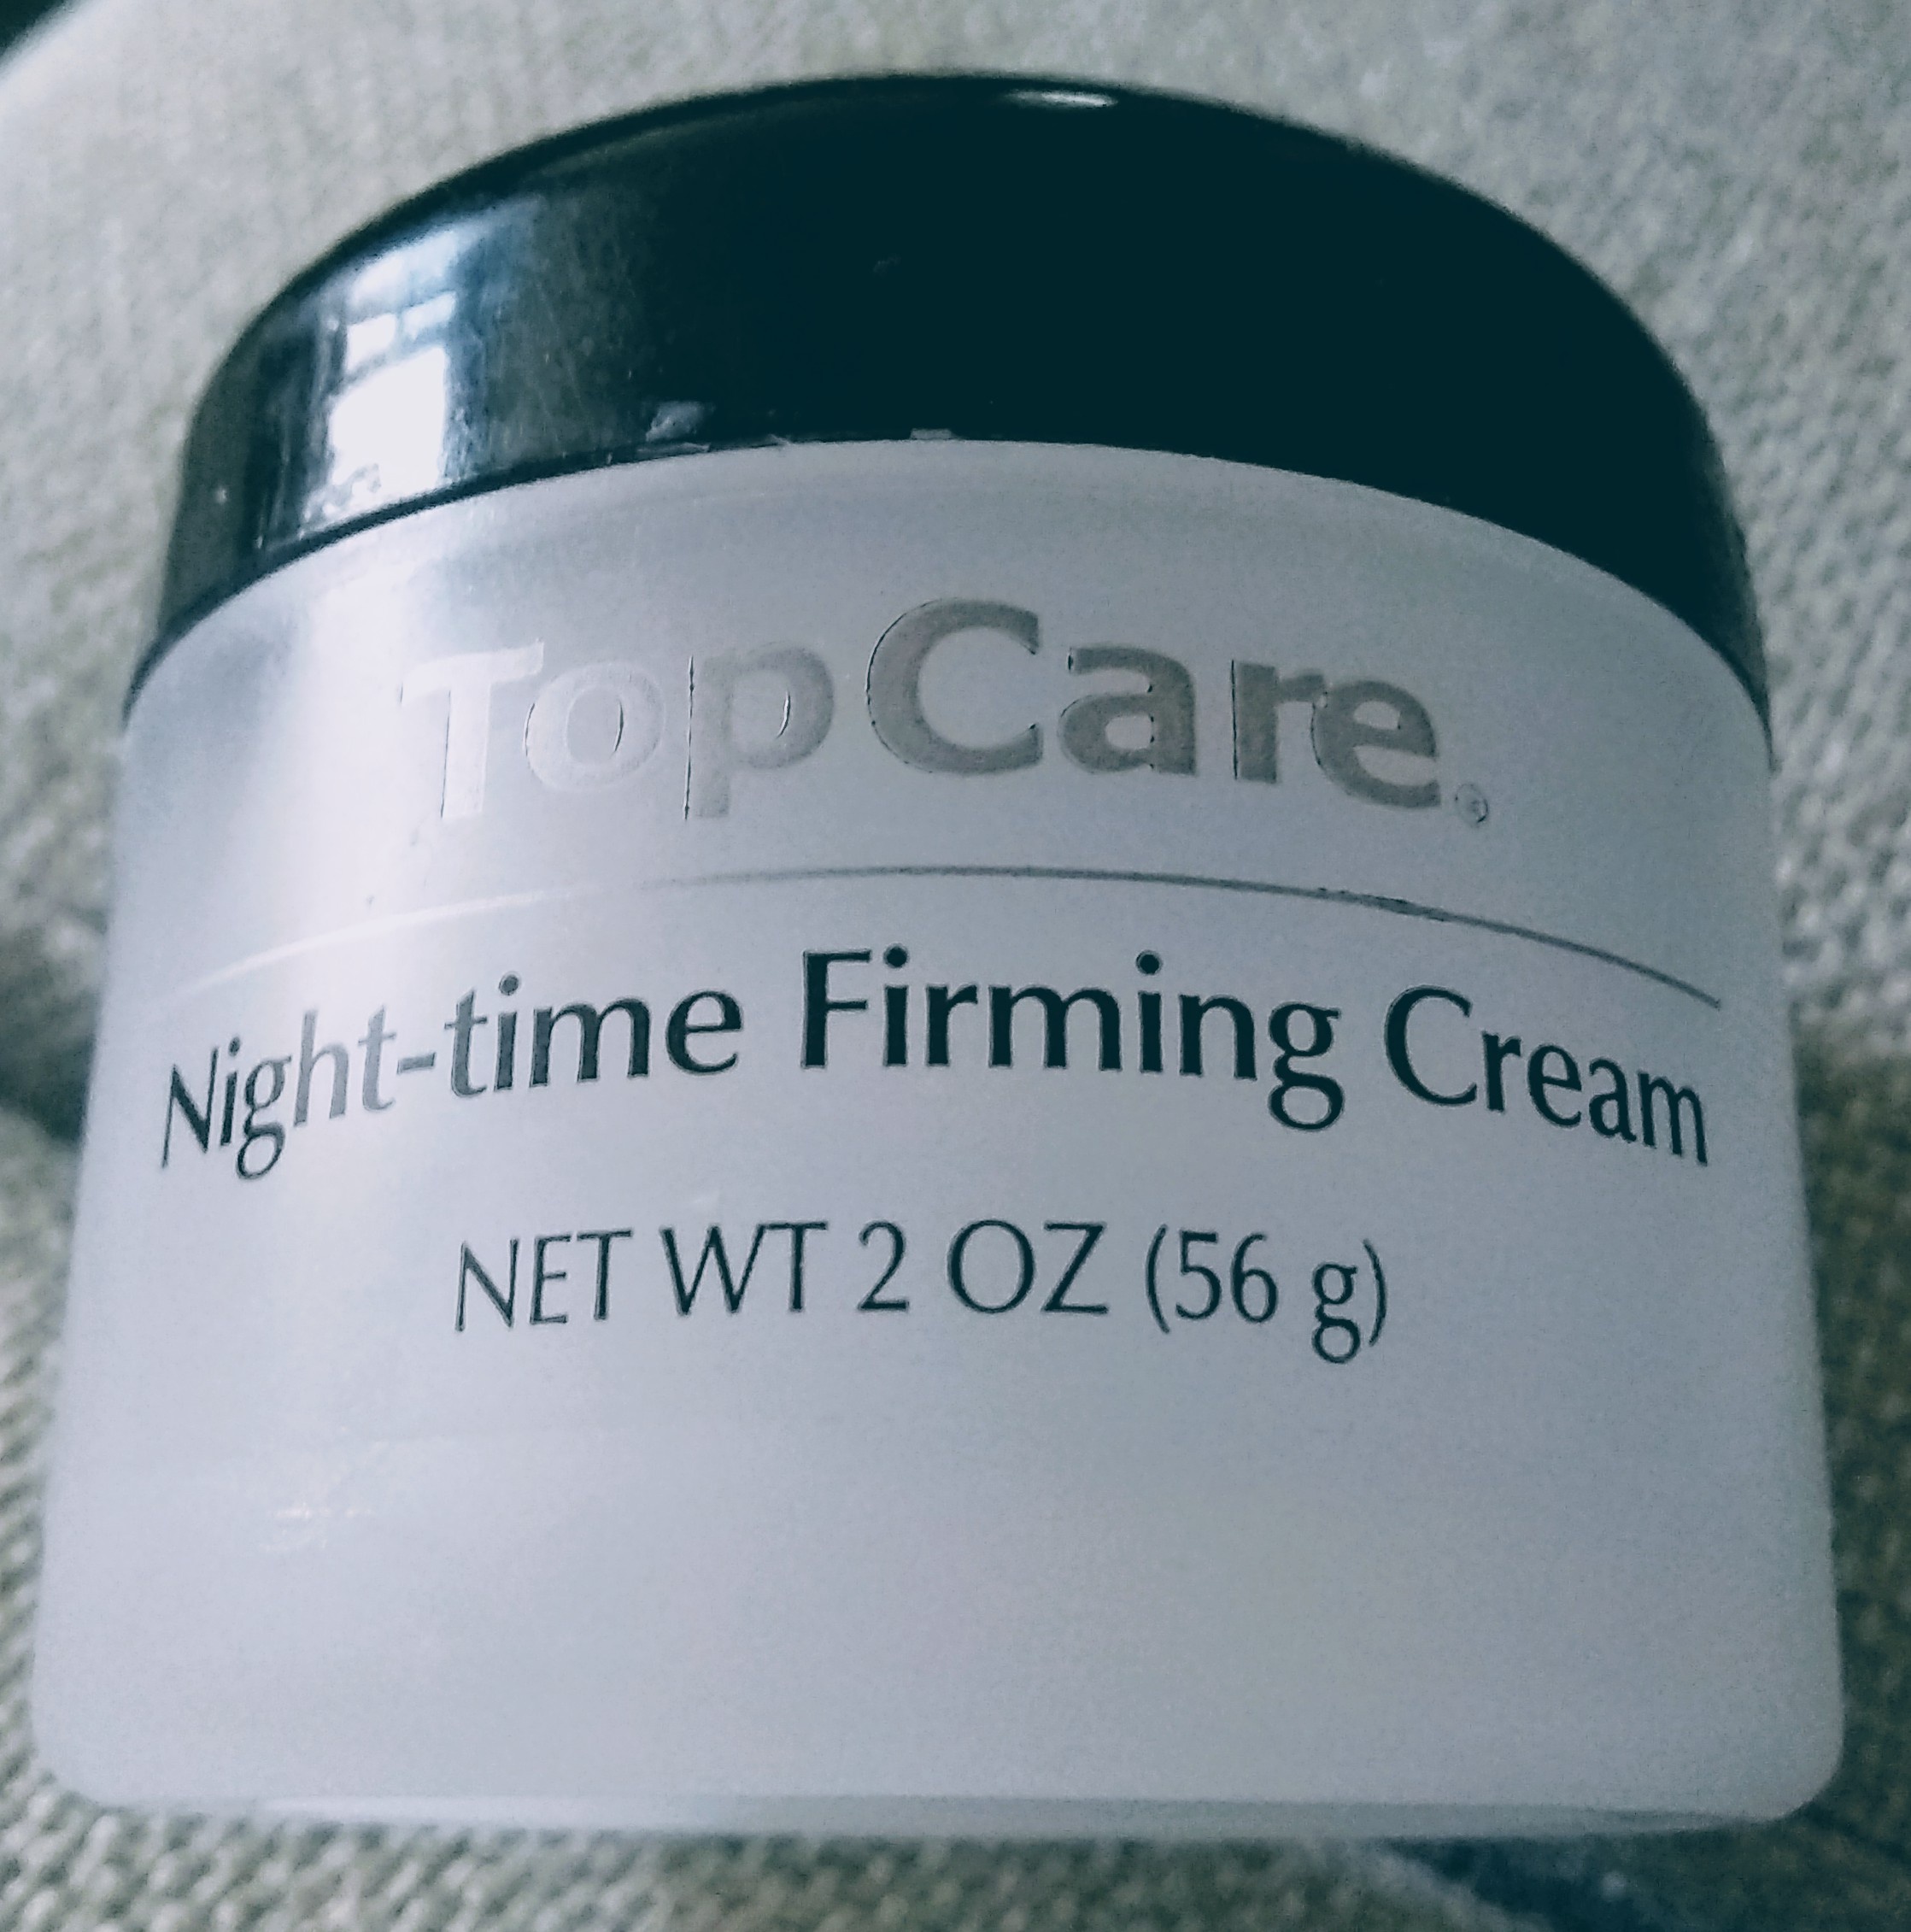 Top Care Night Time Firming Cream